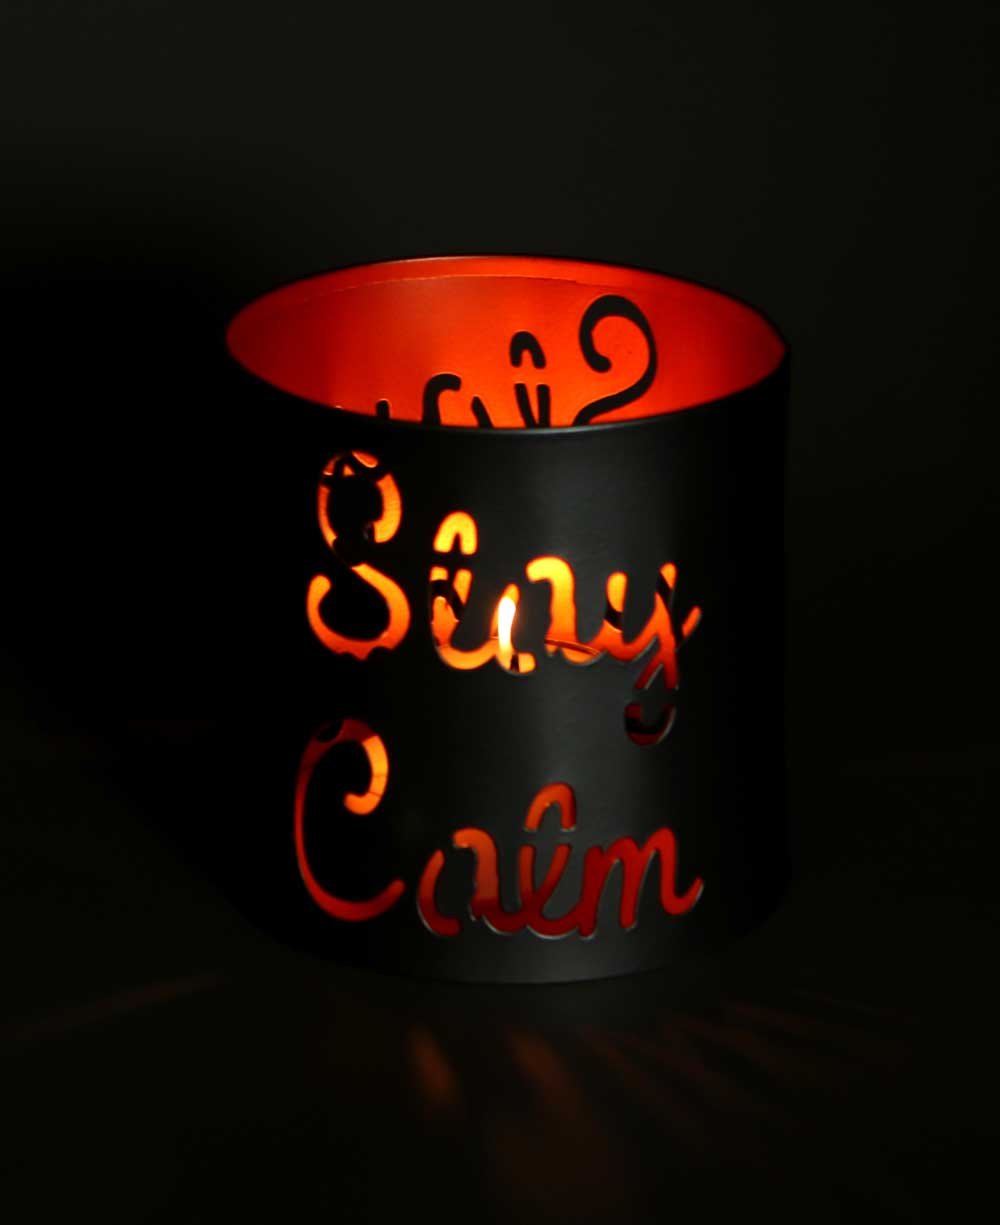 Fairtrade Inspirational Stay Calm Candle / Pen Holder - Candle Holders